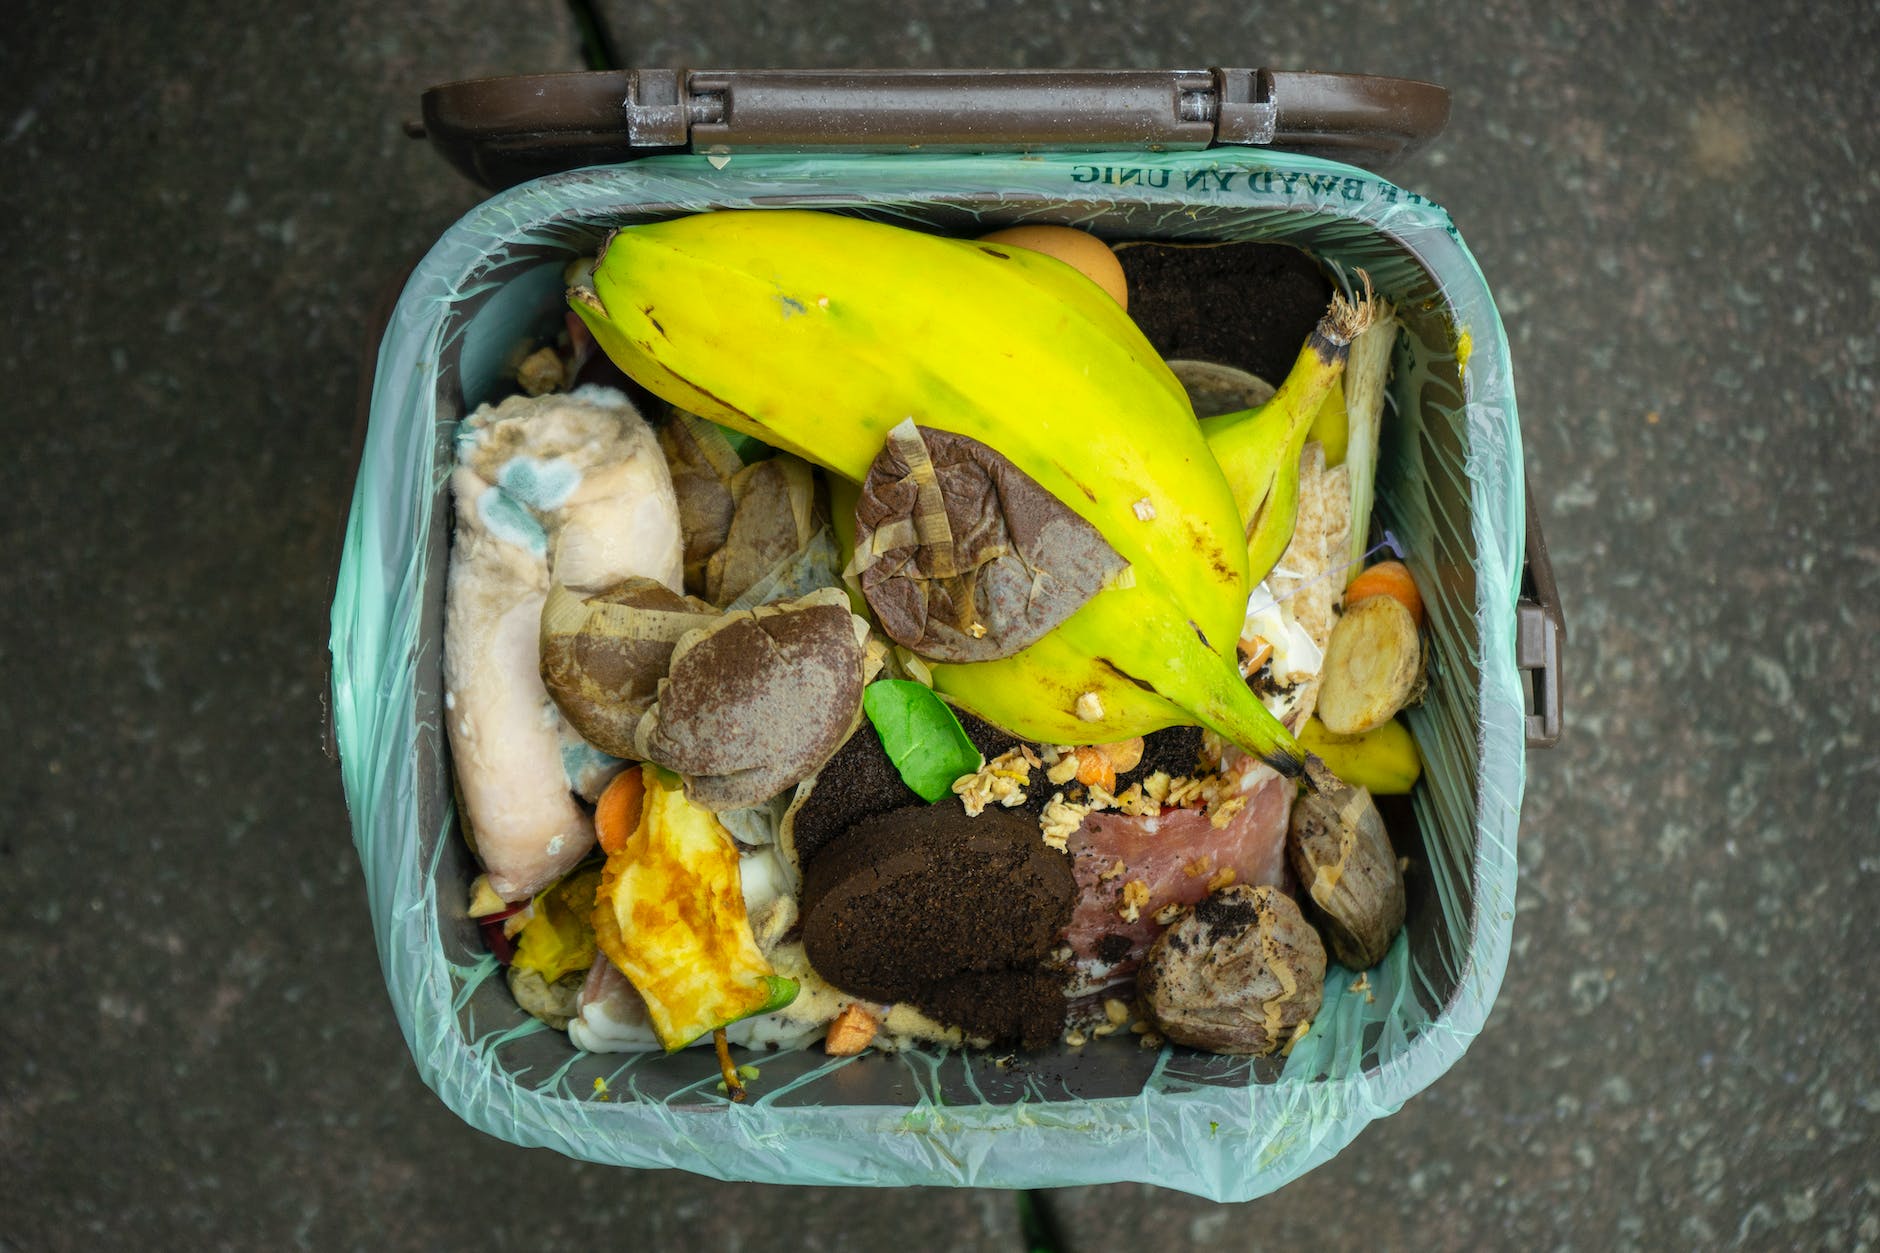 overhead shot of a garbage can with food waste